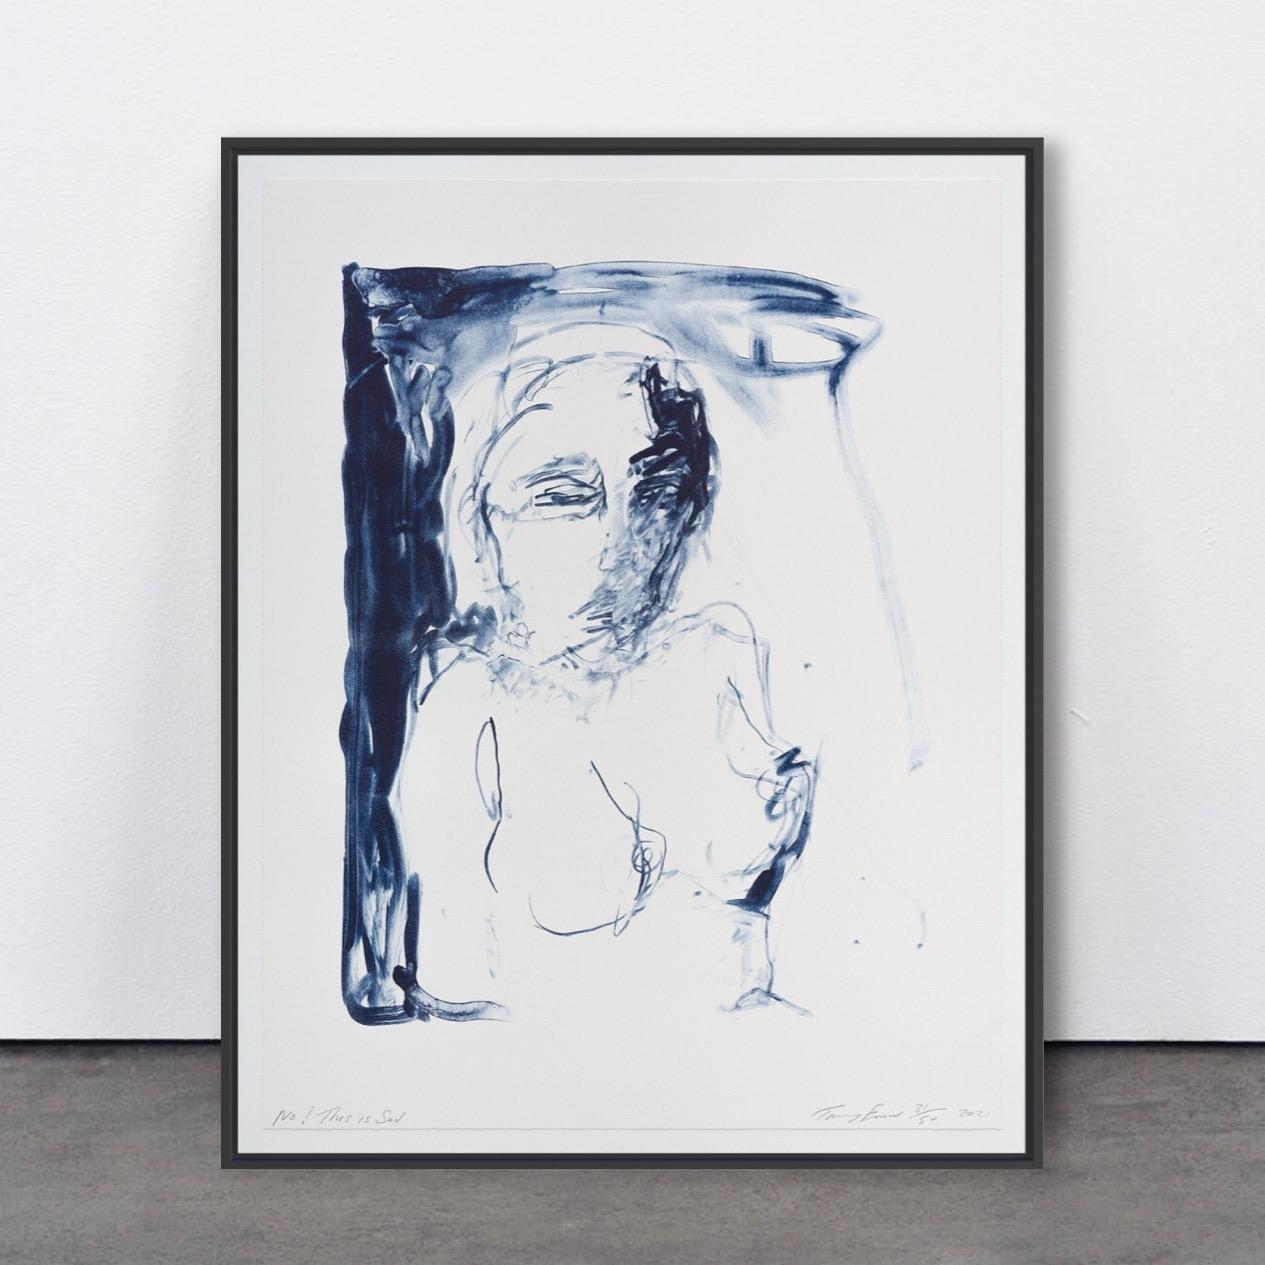 Tracey Emin Figurative Print - No! This is sad, (from A Journey to Death) - Litograph, YBAs, Emin